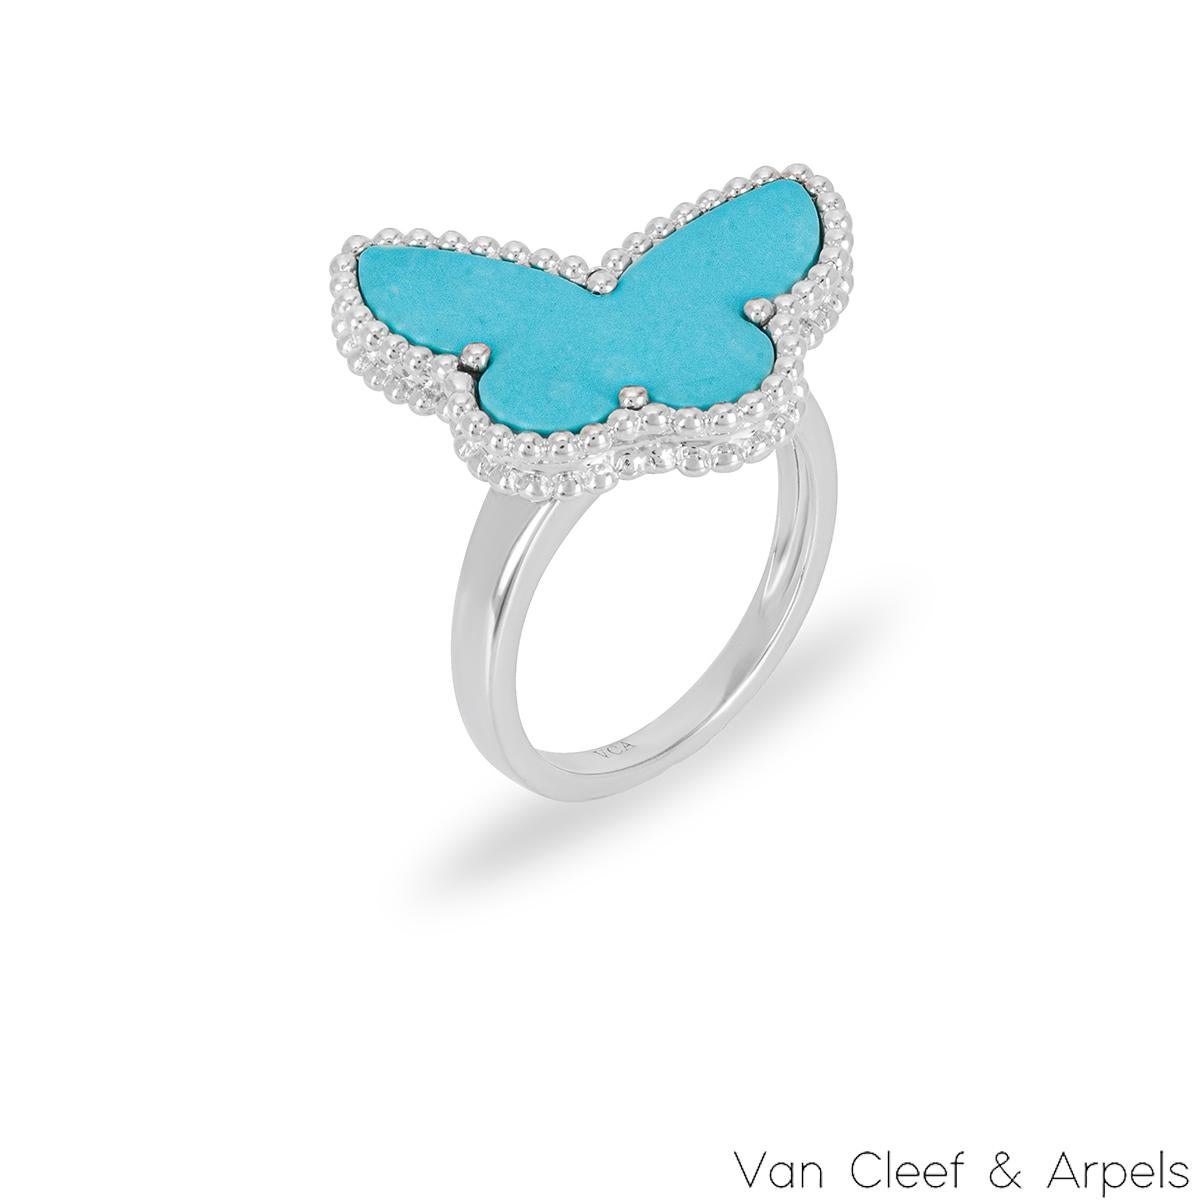 A beautiful 18k white gold turquoise ring from the Lucky Alhambra collection by Van Cleef & Arpels. The ring is set with an off-centre butterfly motif and a turquoise inlay that is further complemented by a beaded outer edge. The motif measures 16mm